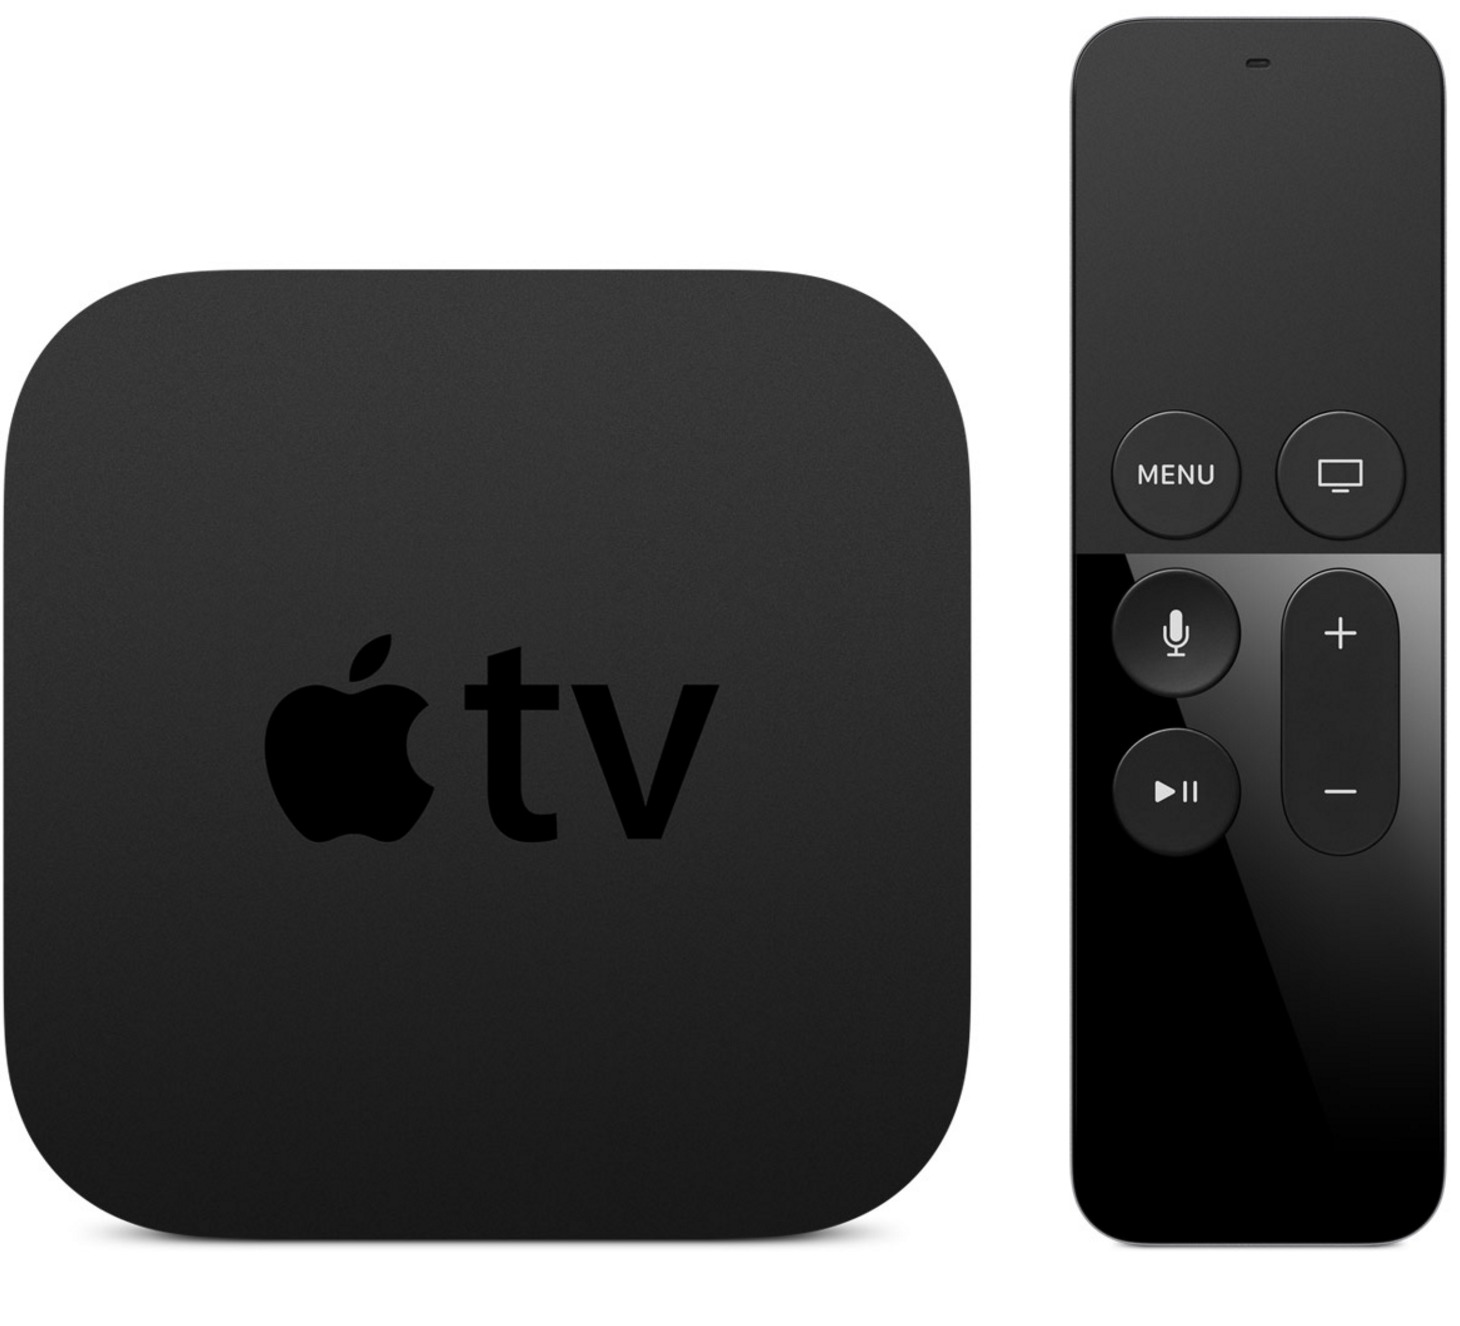 Overbevisende egoisme form The New Apple TV: TidBITS Answers Your Questions - TidBITS